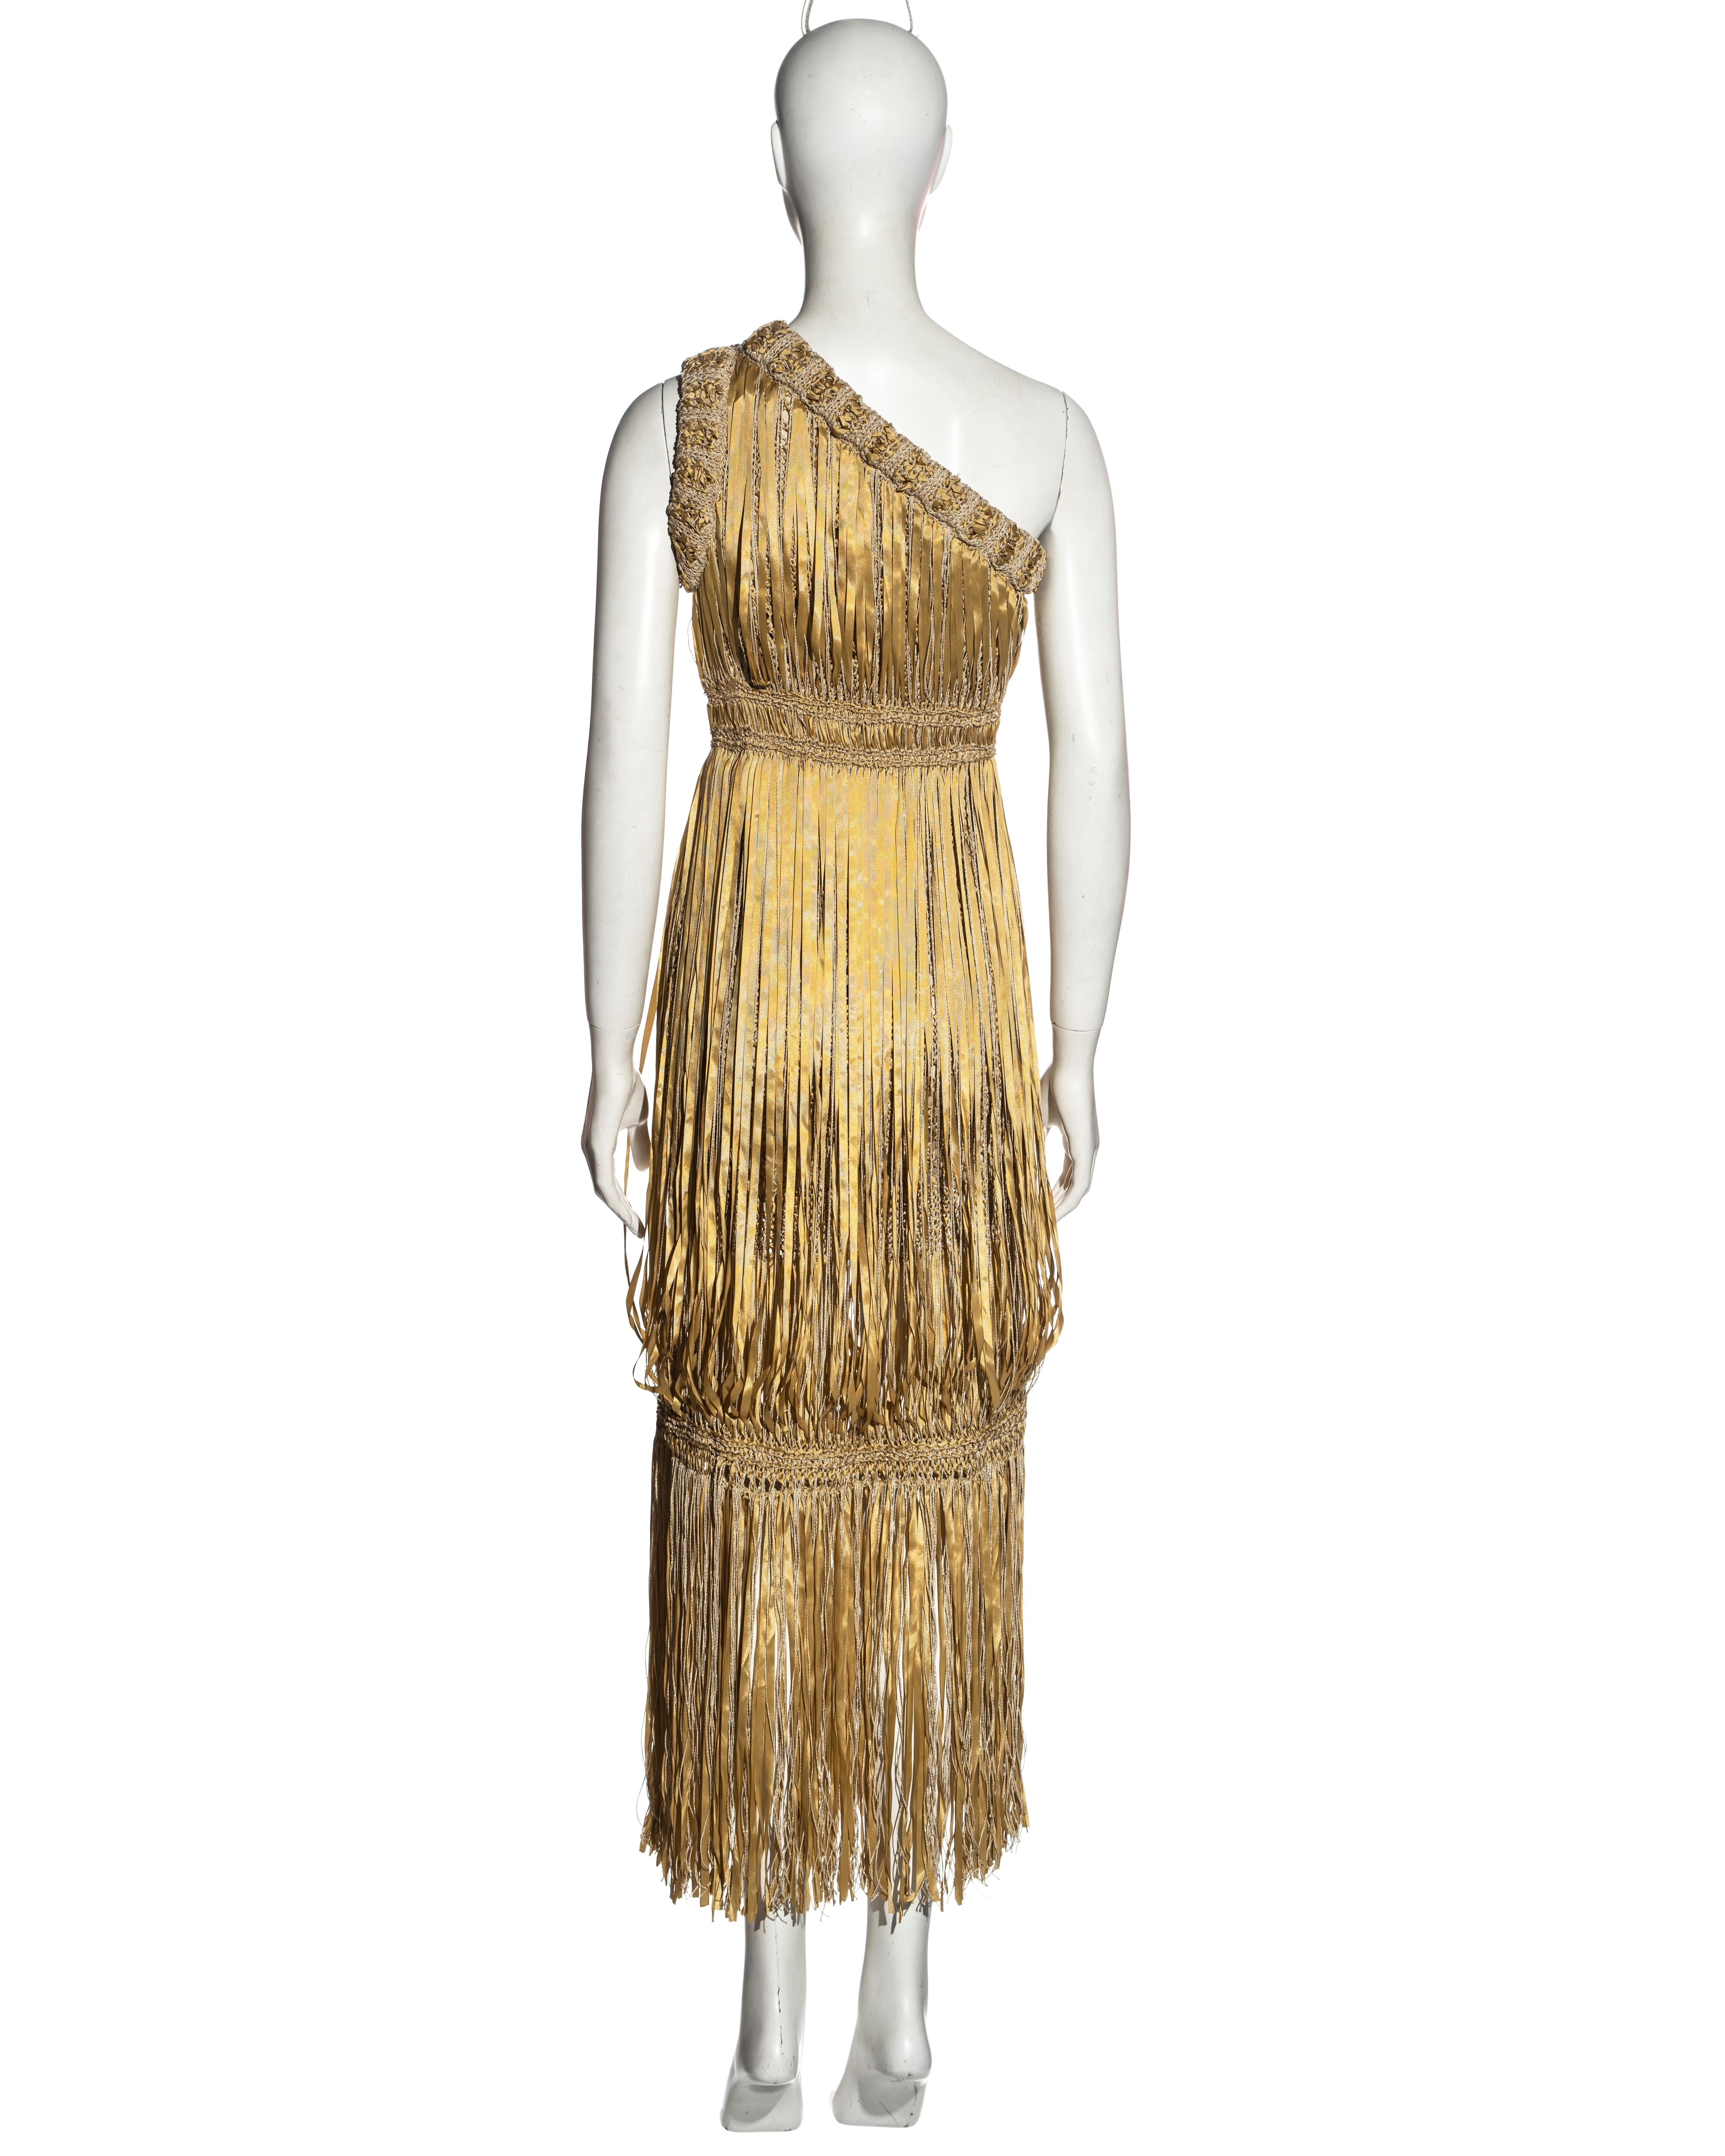 Chanel by Karl Lagerfeld straw crochet and ribbon one-shoulder dress, ss 2011 For Sale 3